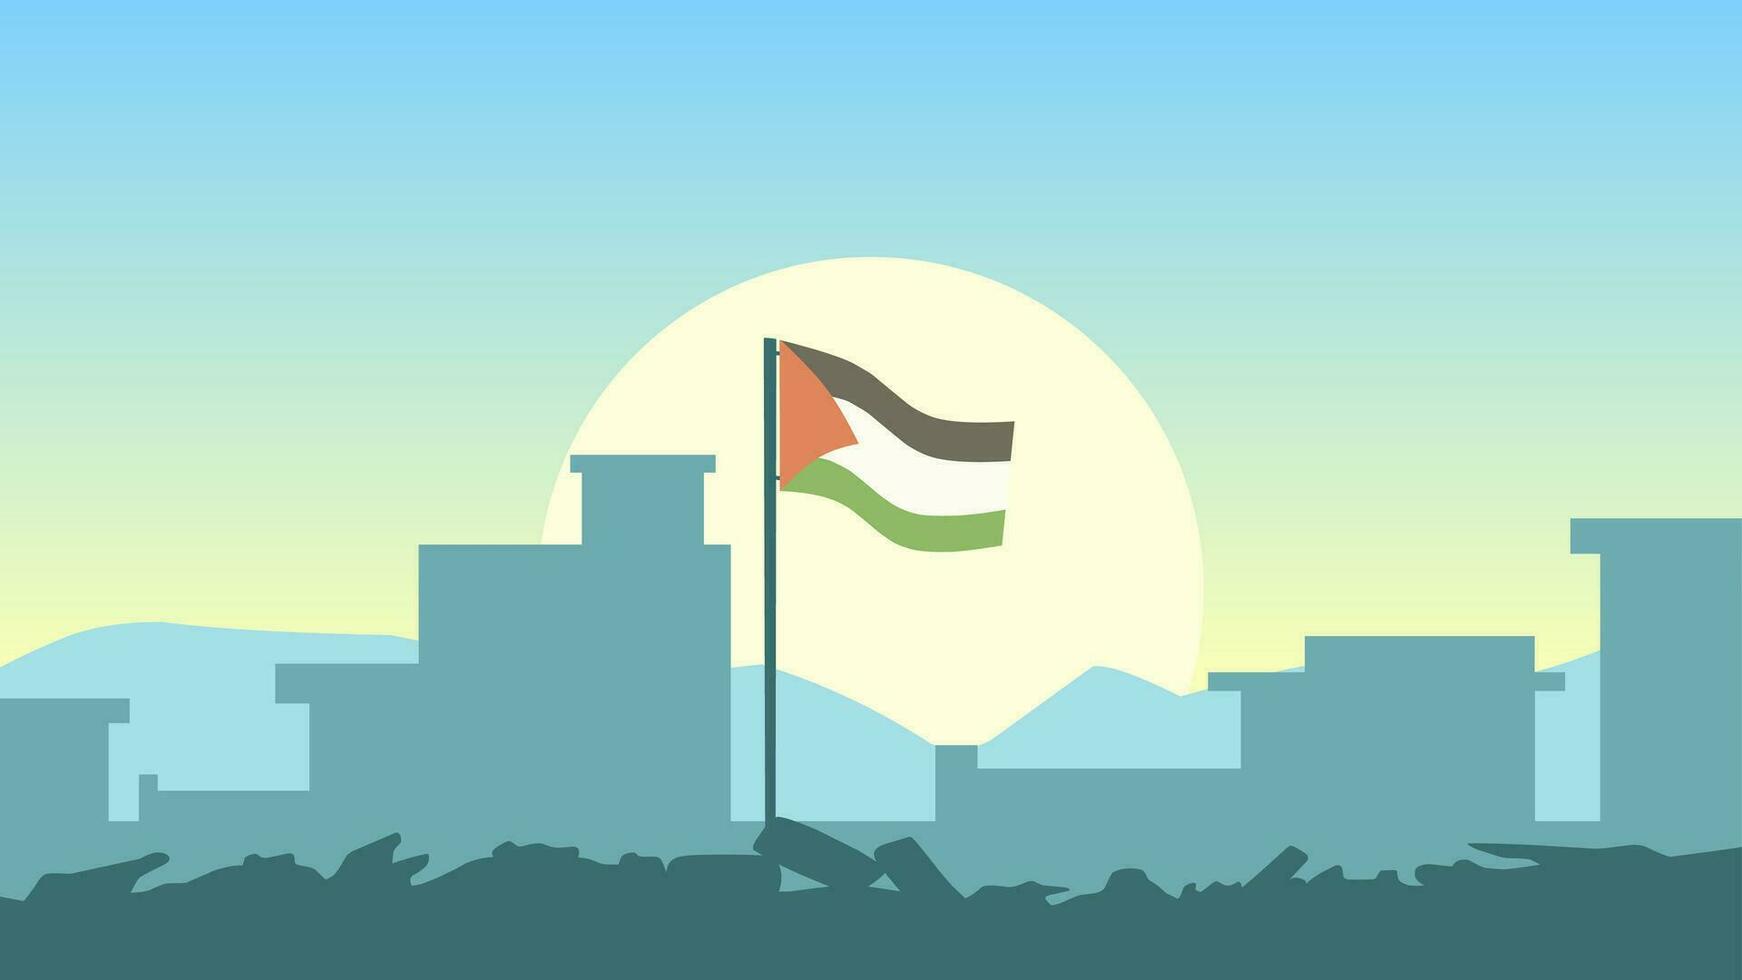 Palestine landscape vector illustration. Silhouette of destroyed buildings at morning with palestine flag. Landscape illustration of destroyed city for background or wallpaper